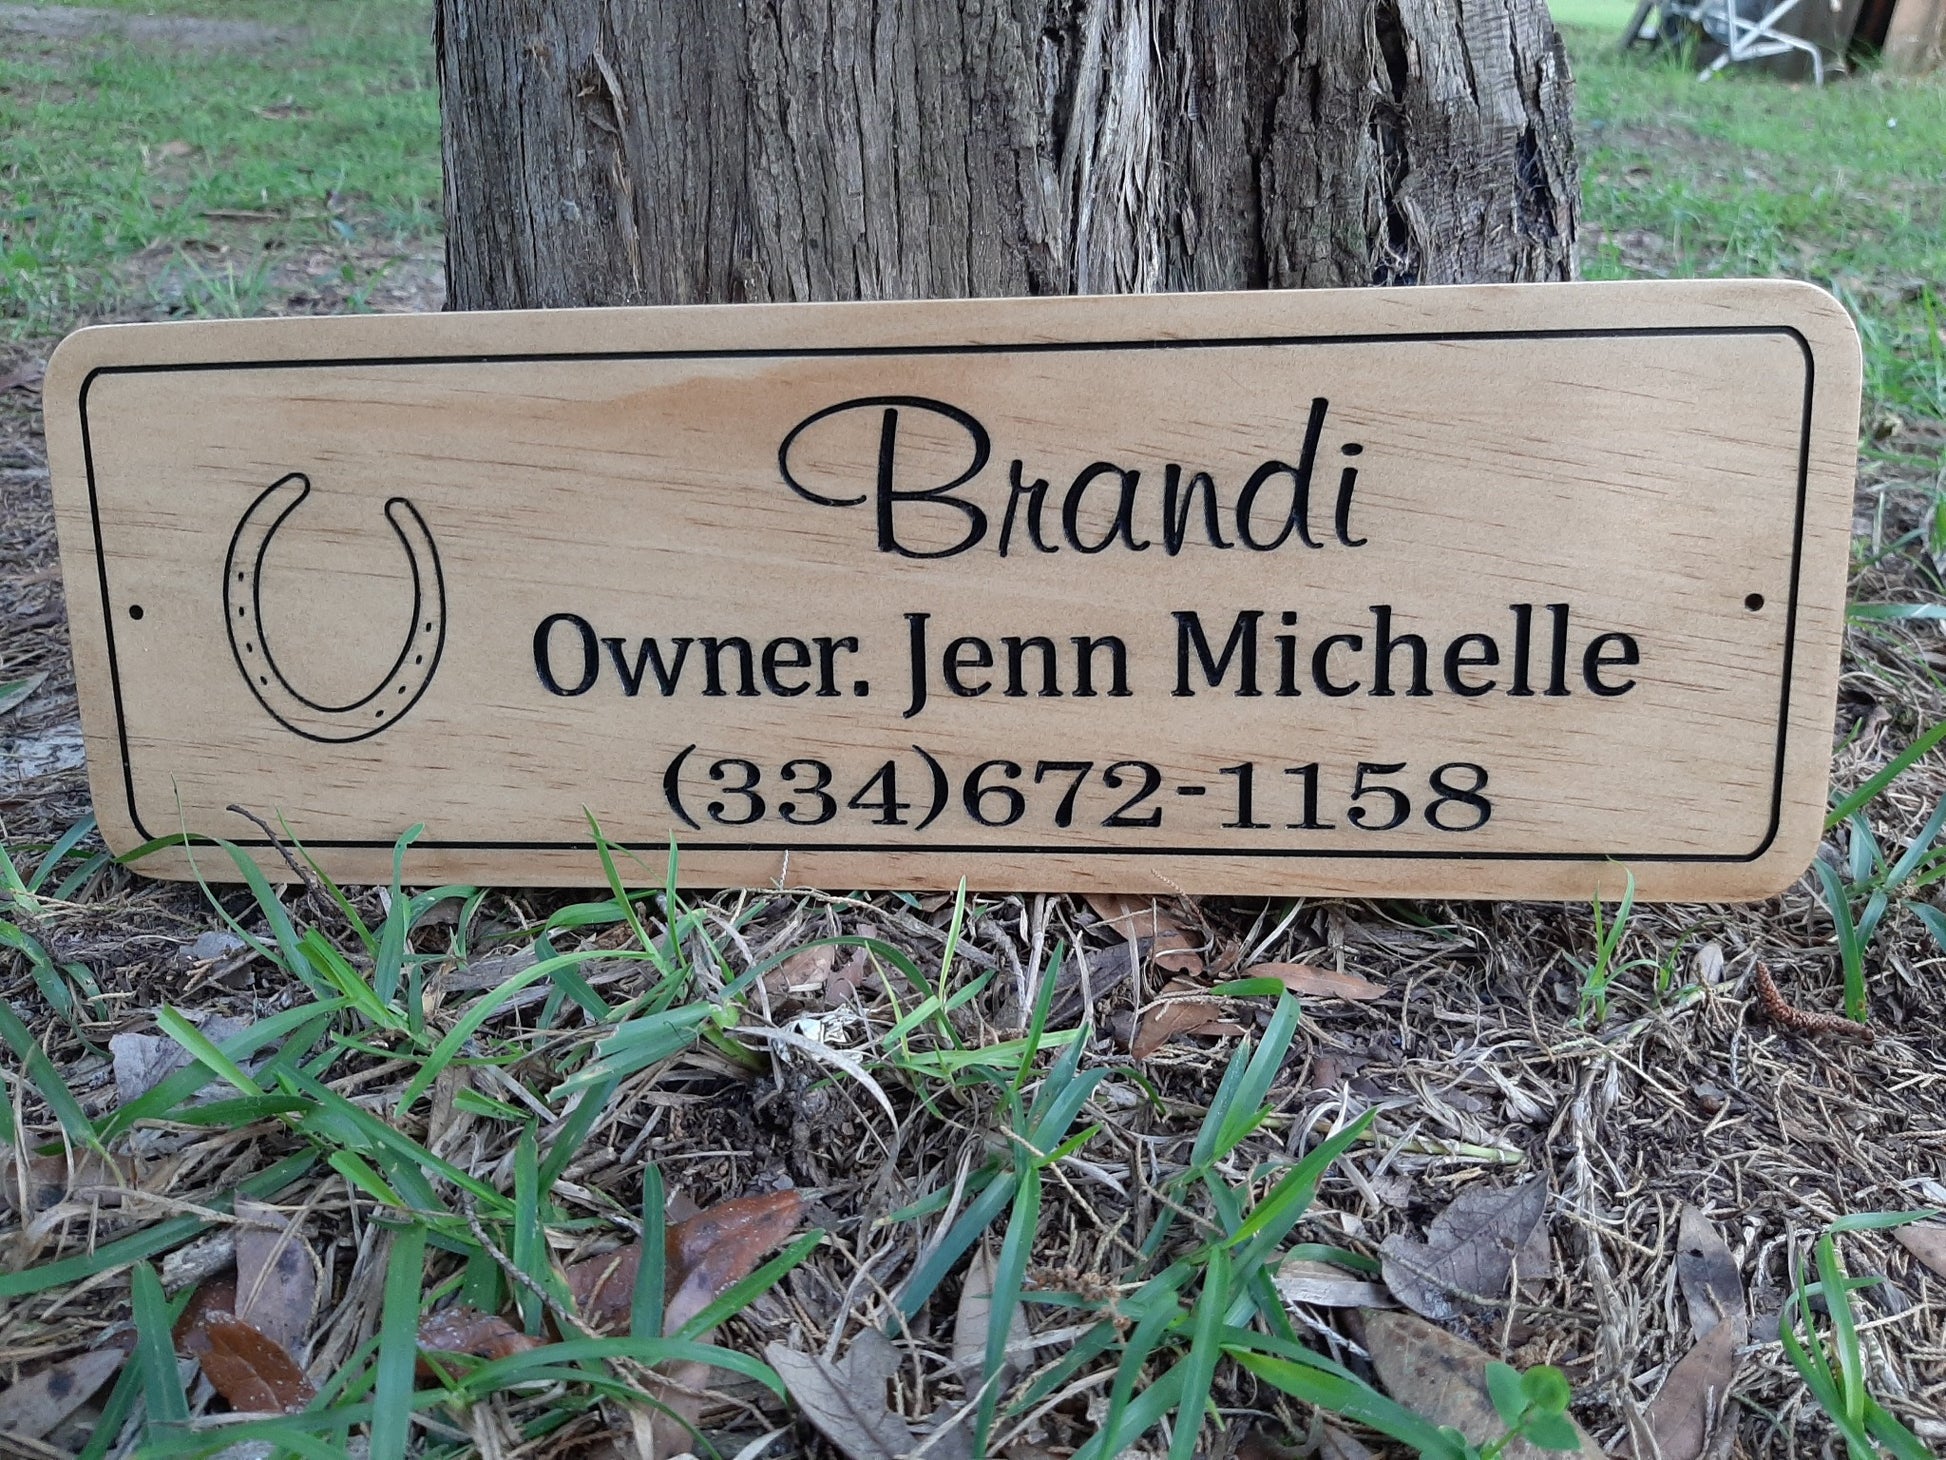 Horse stall name plate with owners name and phone number